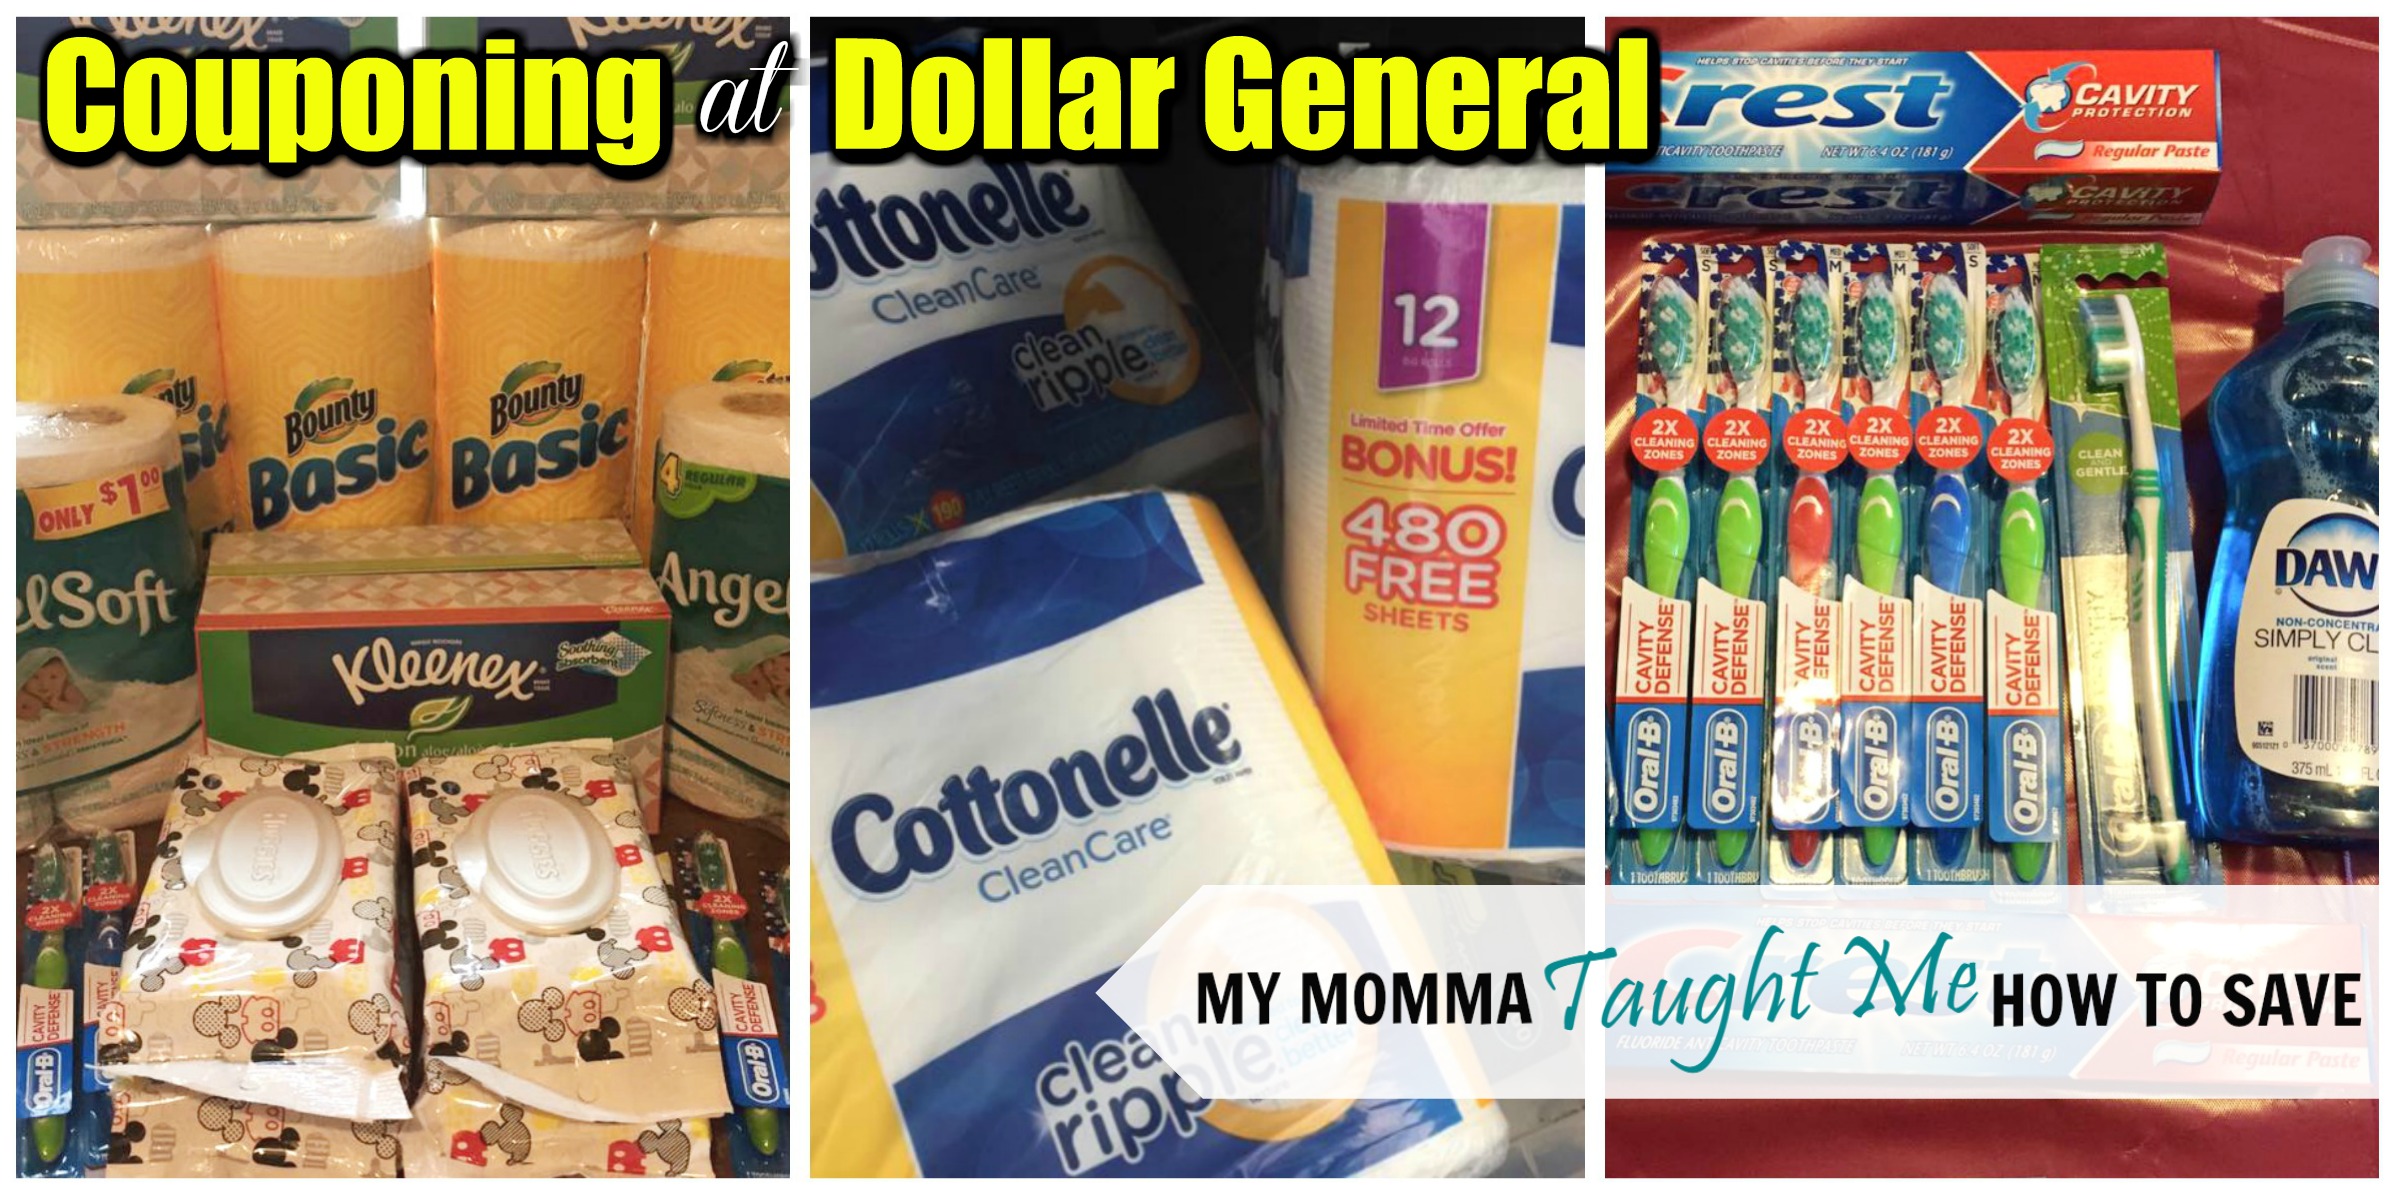 How to Coupon at Dollar General